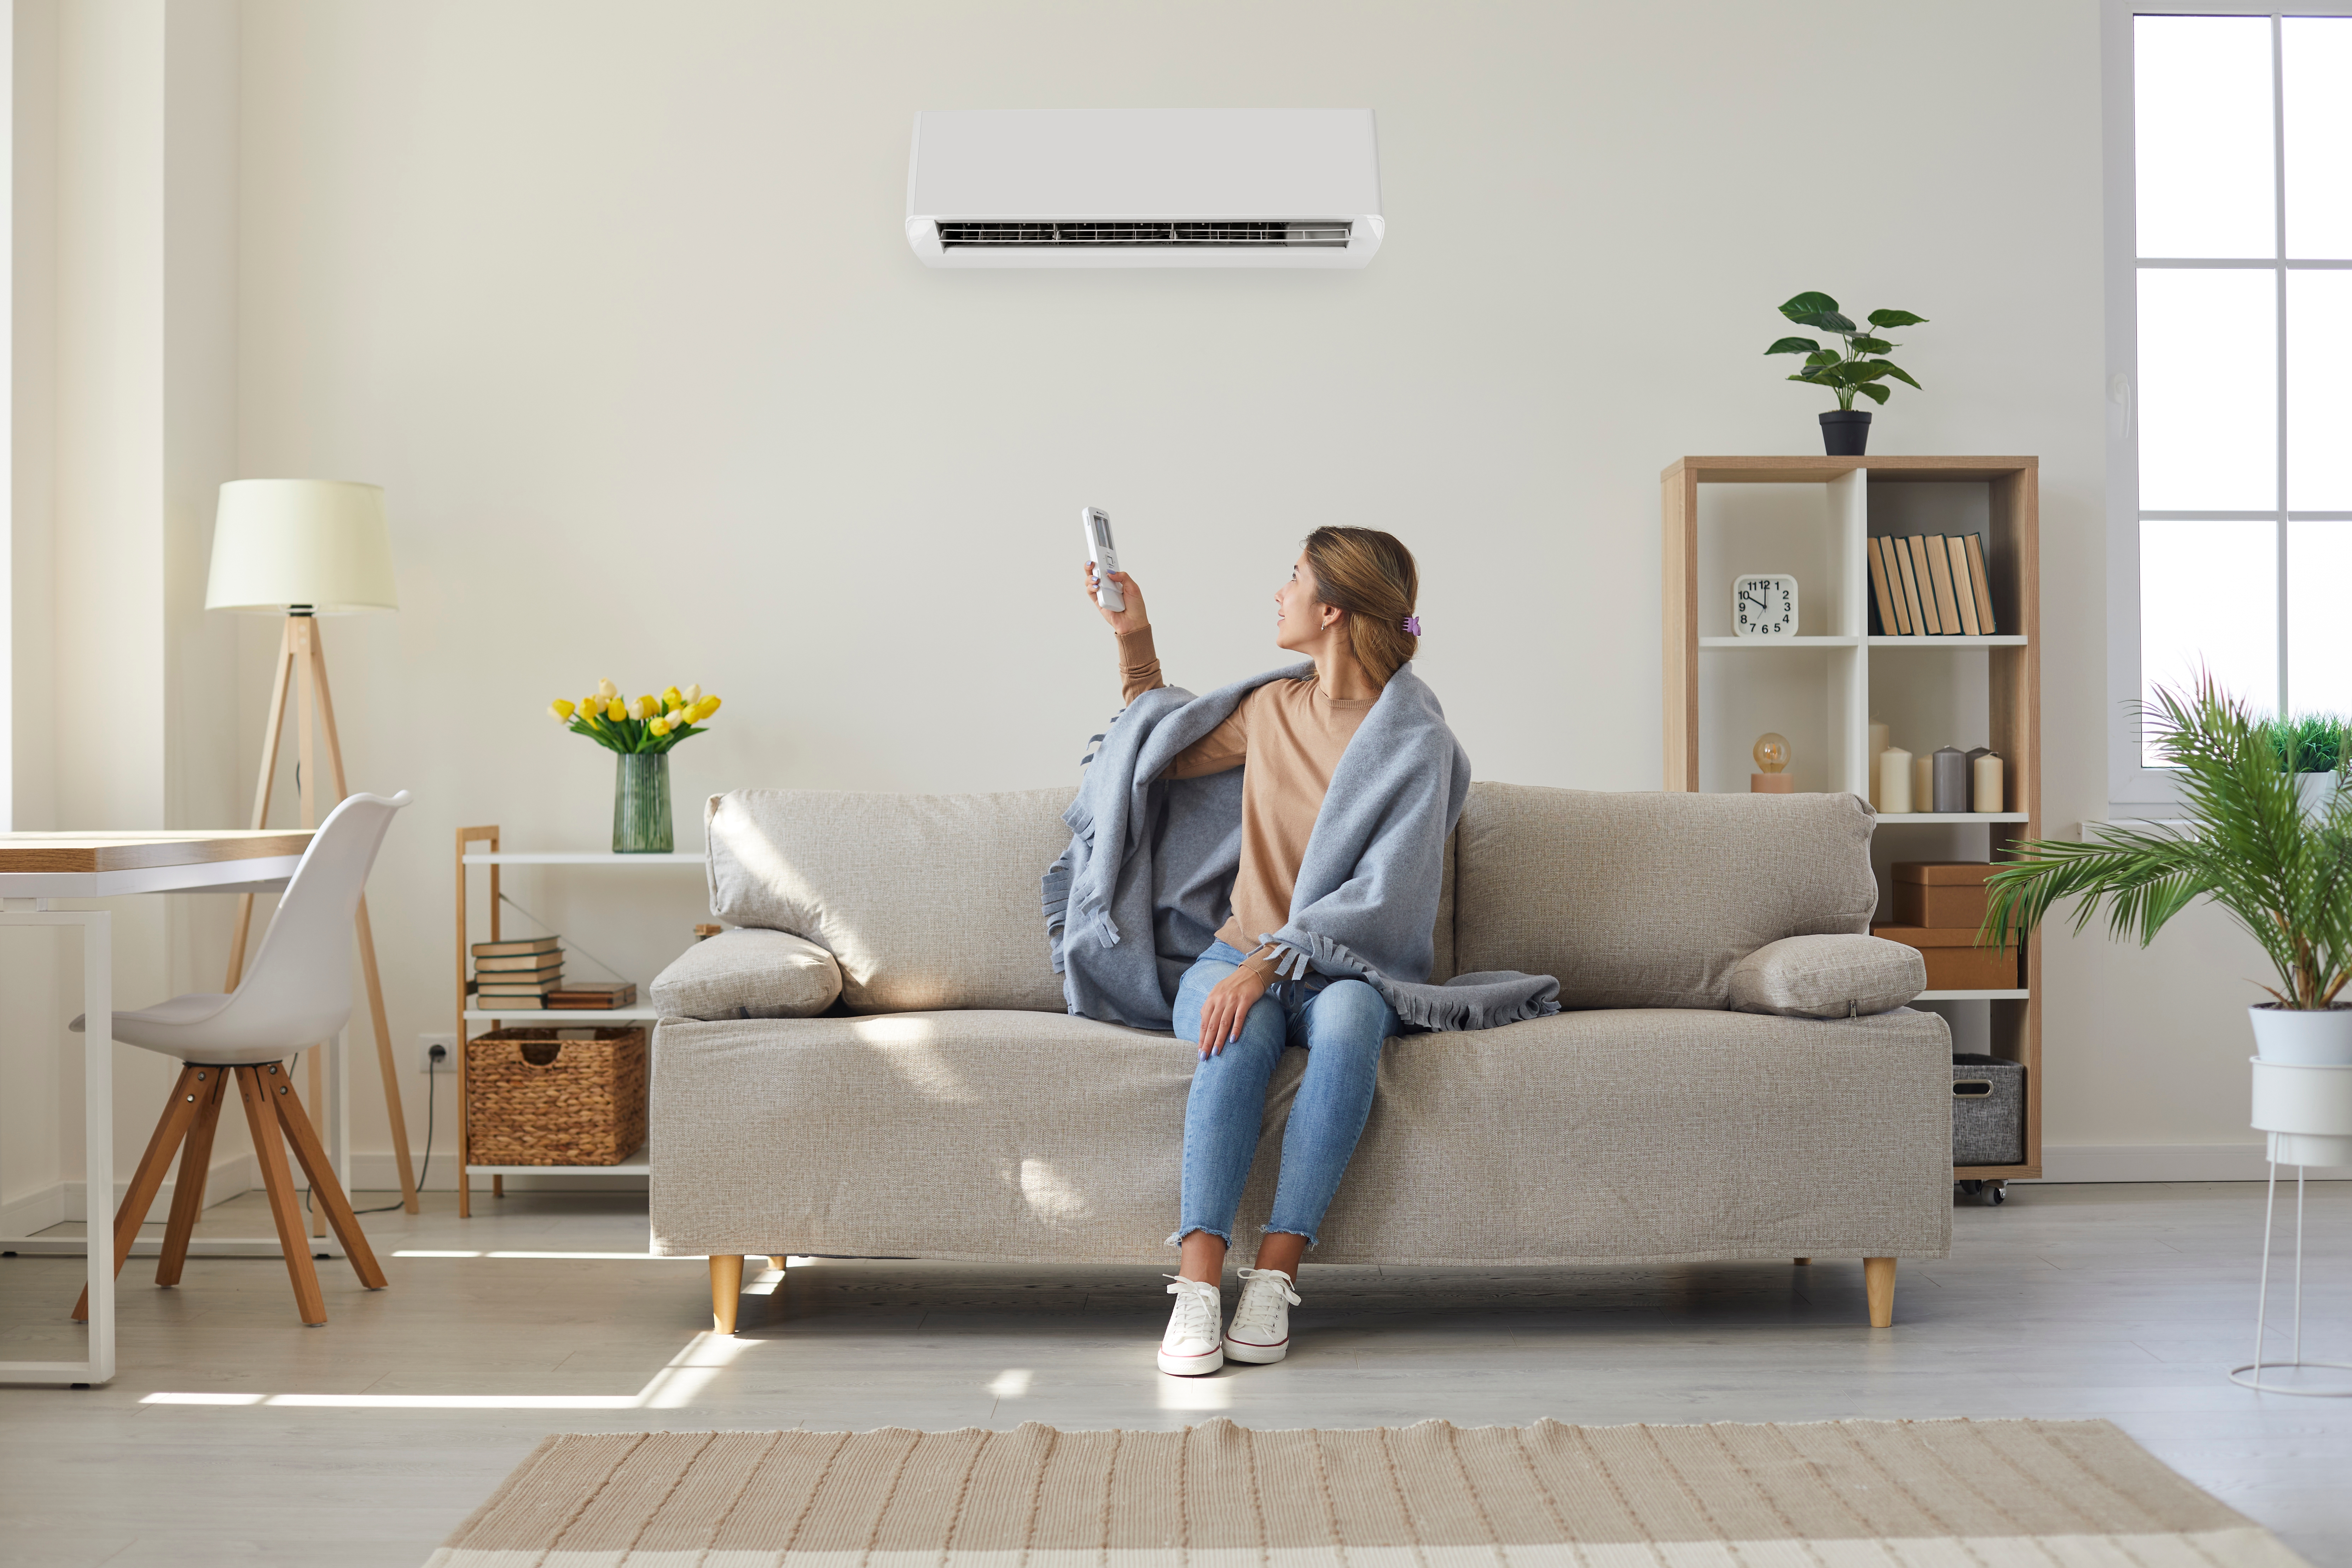 Woman at home on couch turning on air conditioner